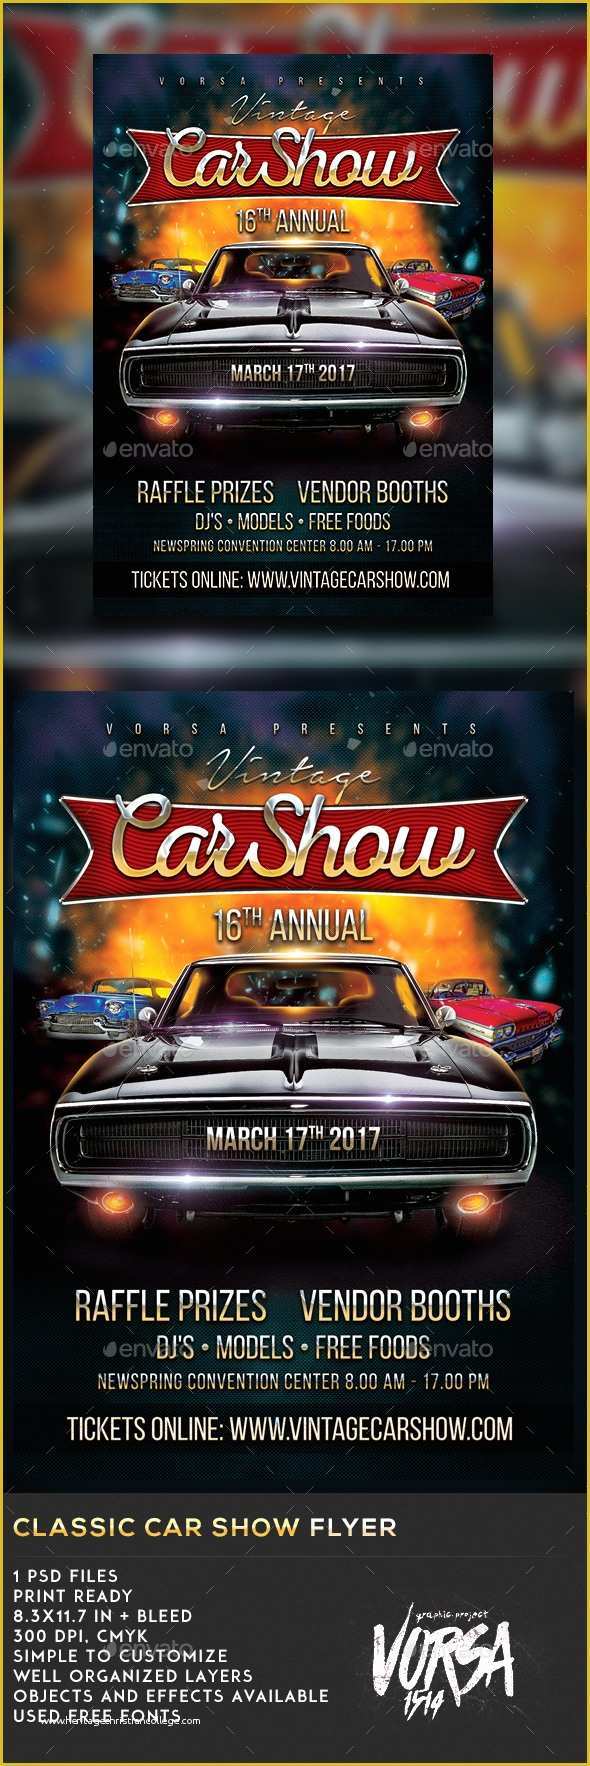 free-car-show-flyer-template-of-classic-car-show-flyer-by-vorsa